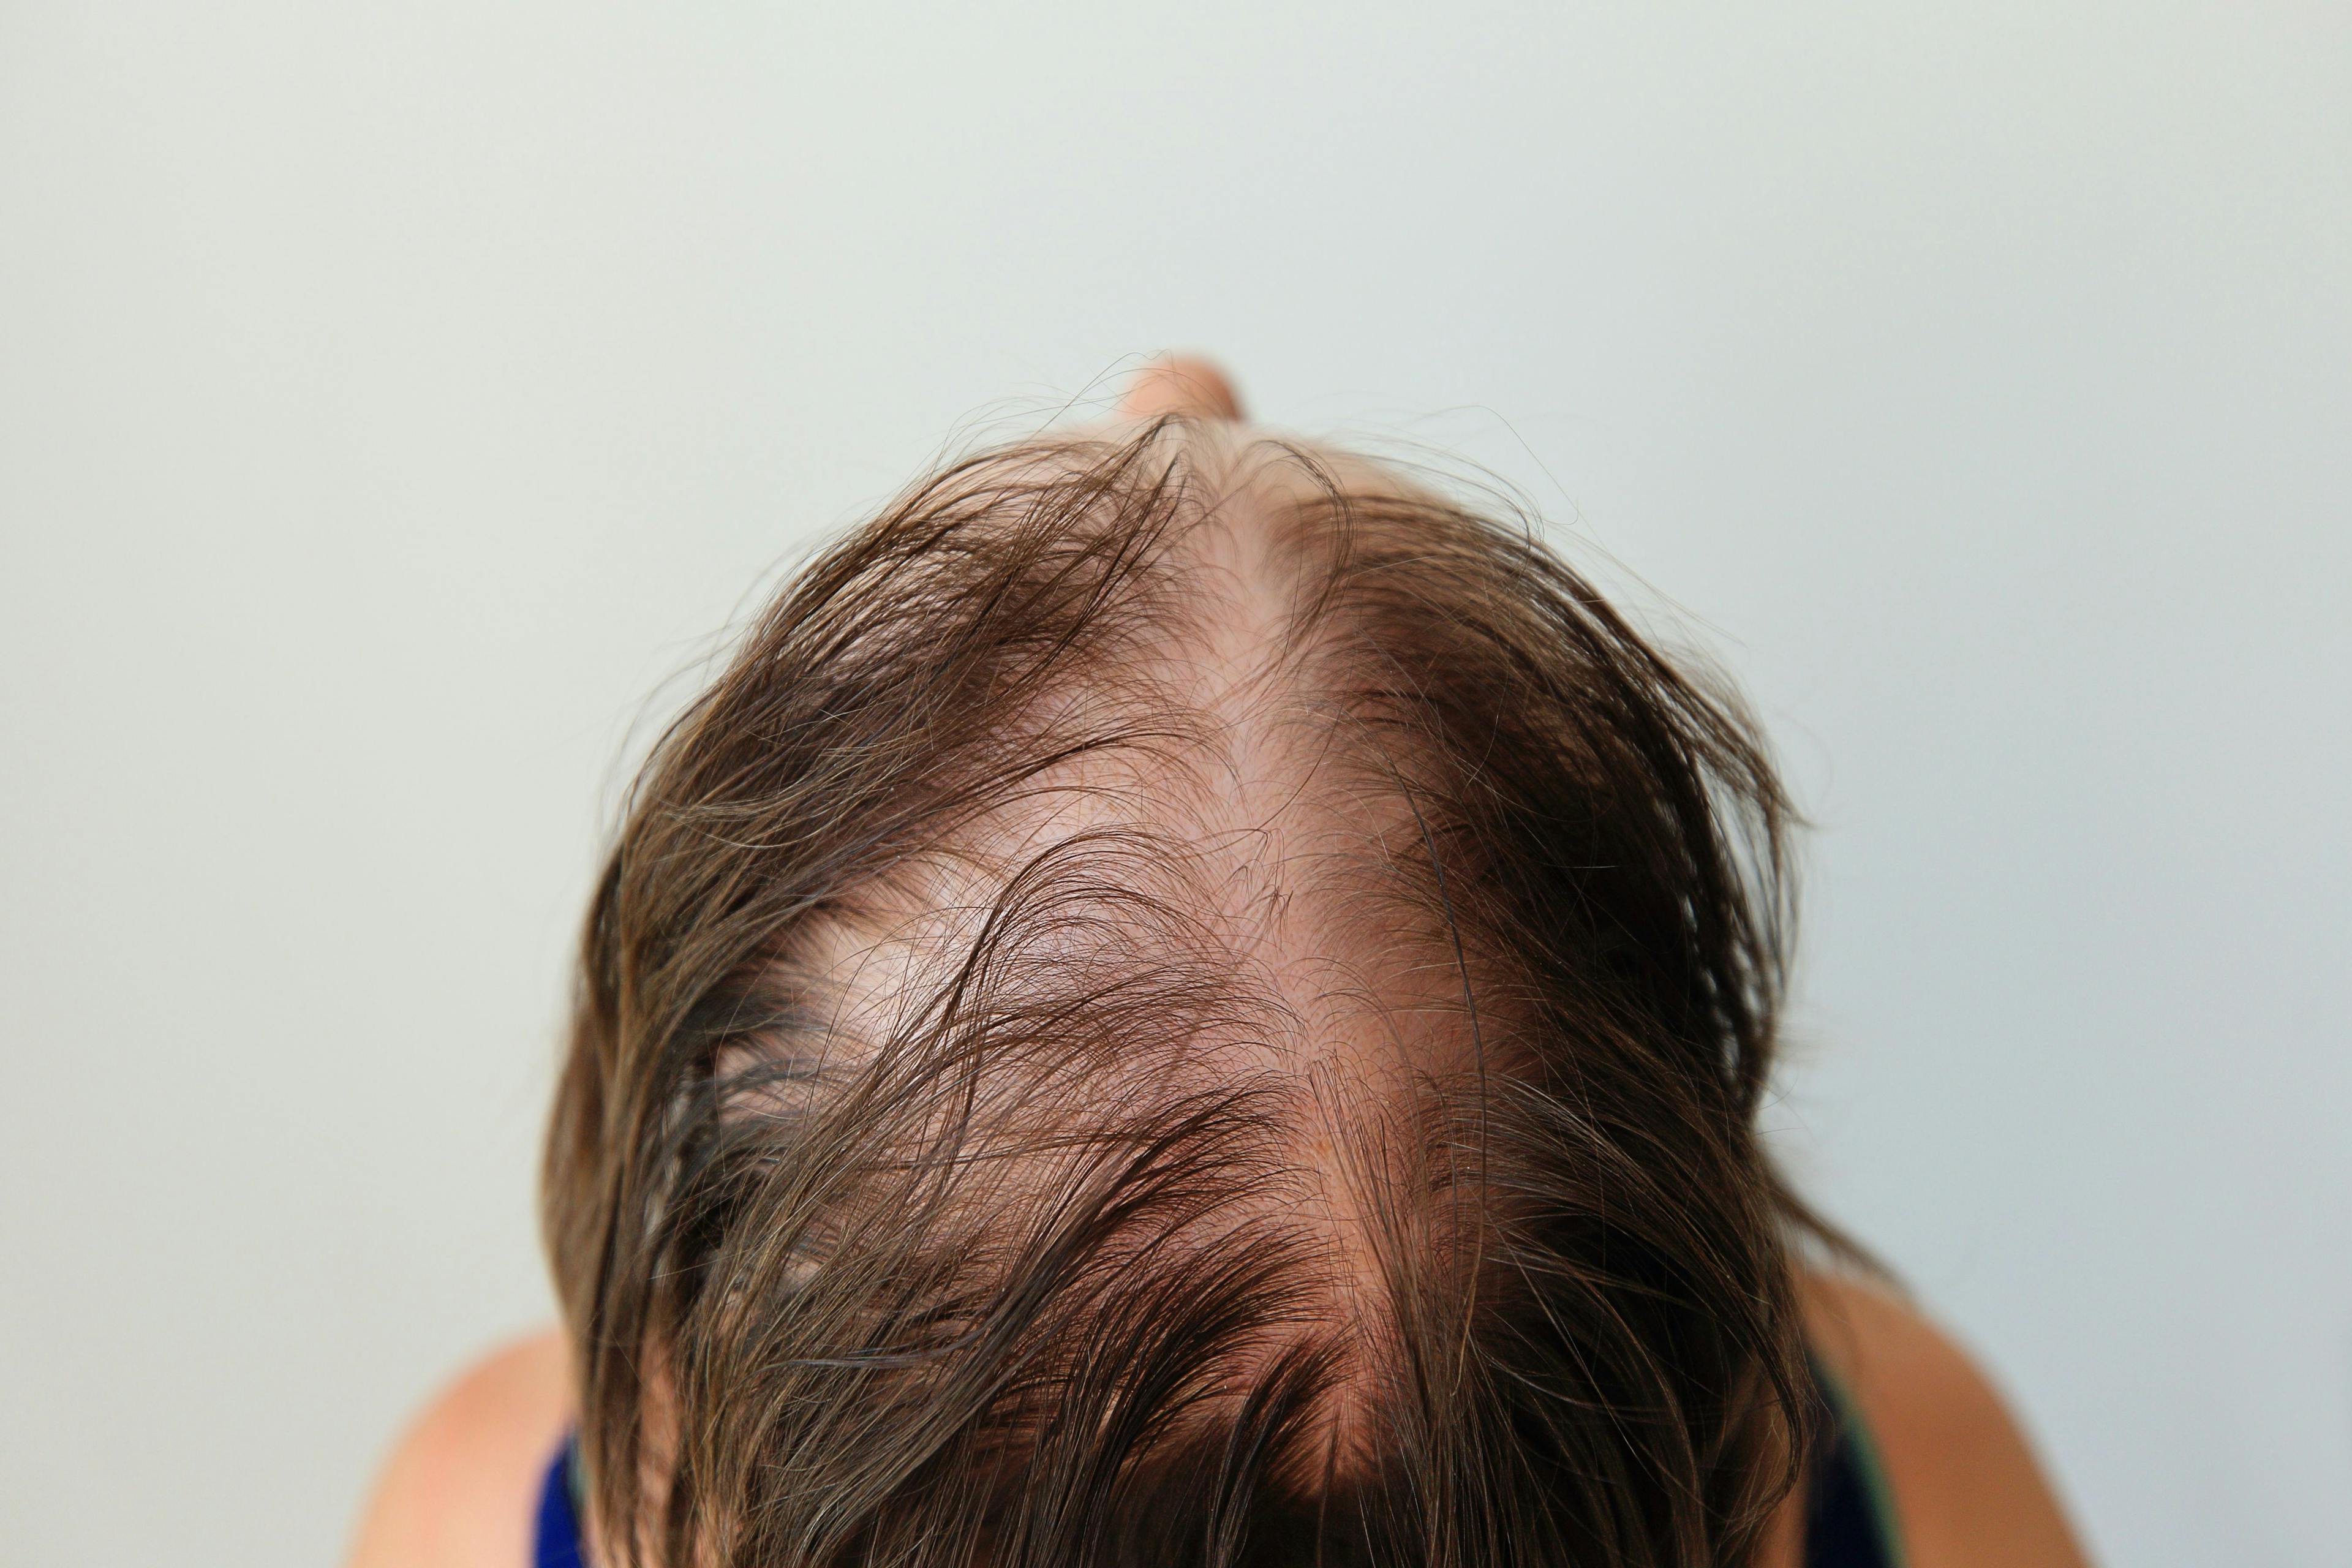 Out of Pocket Costs for Alopecia Treatment Associated With Significant Economic Burden